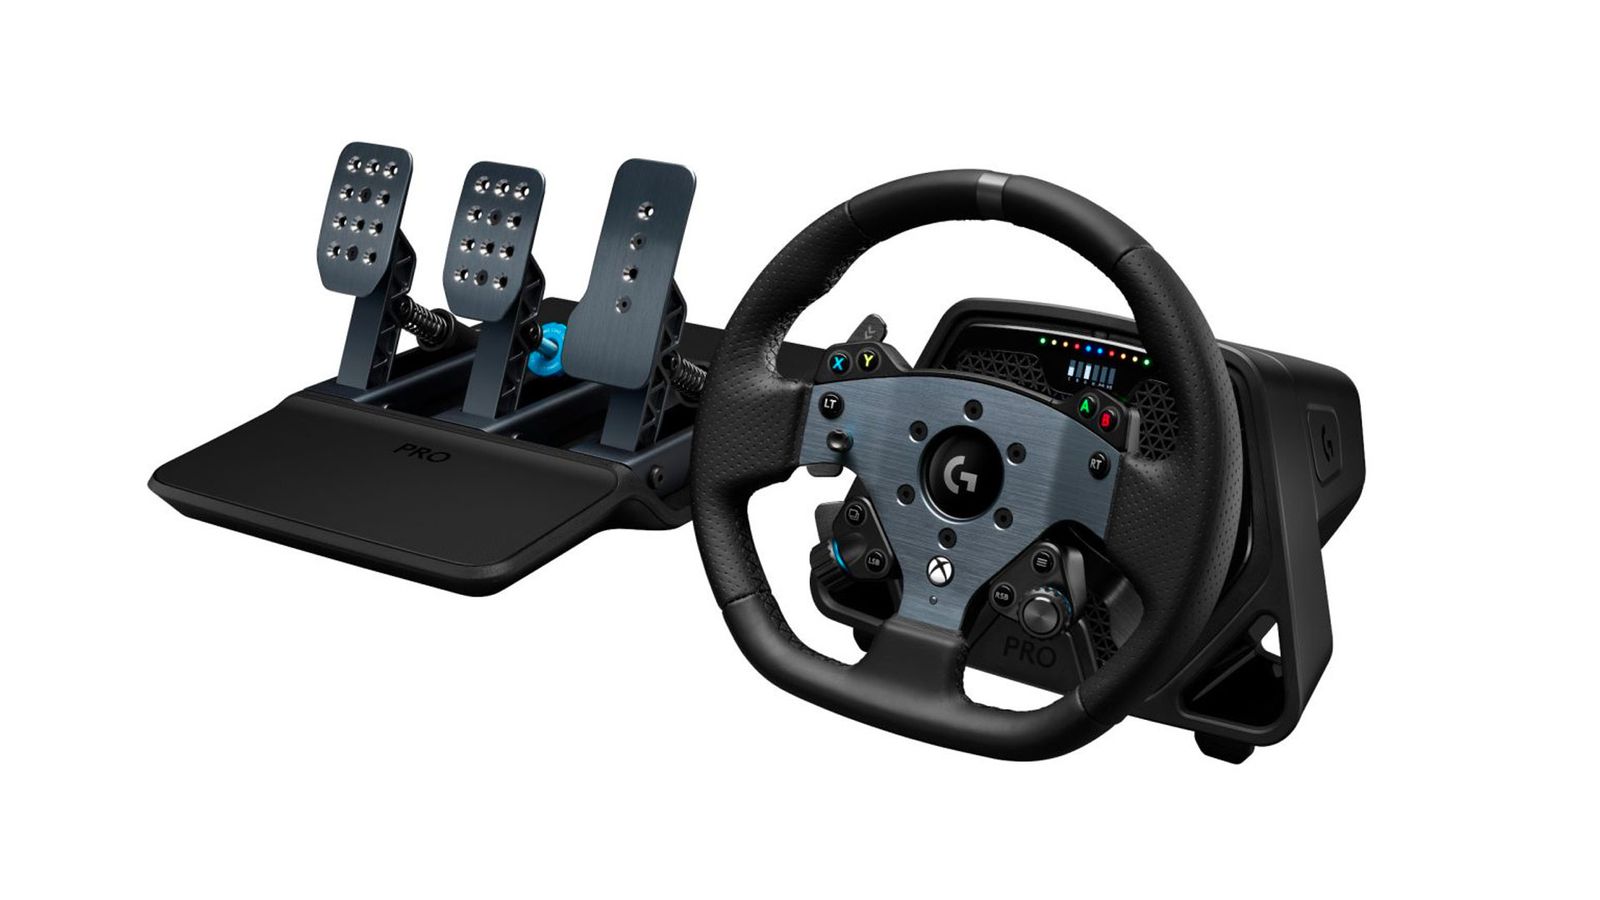 Logitech G PRO Racing Wheel and Pedals product image of a black racing wheel next to a set of pedals.